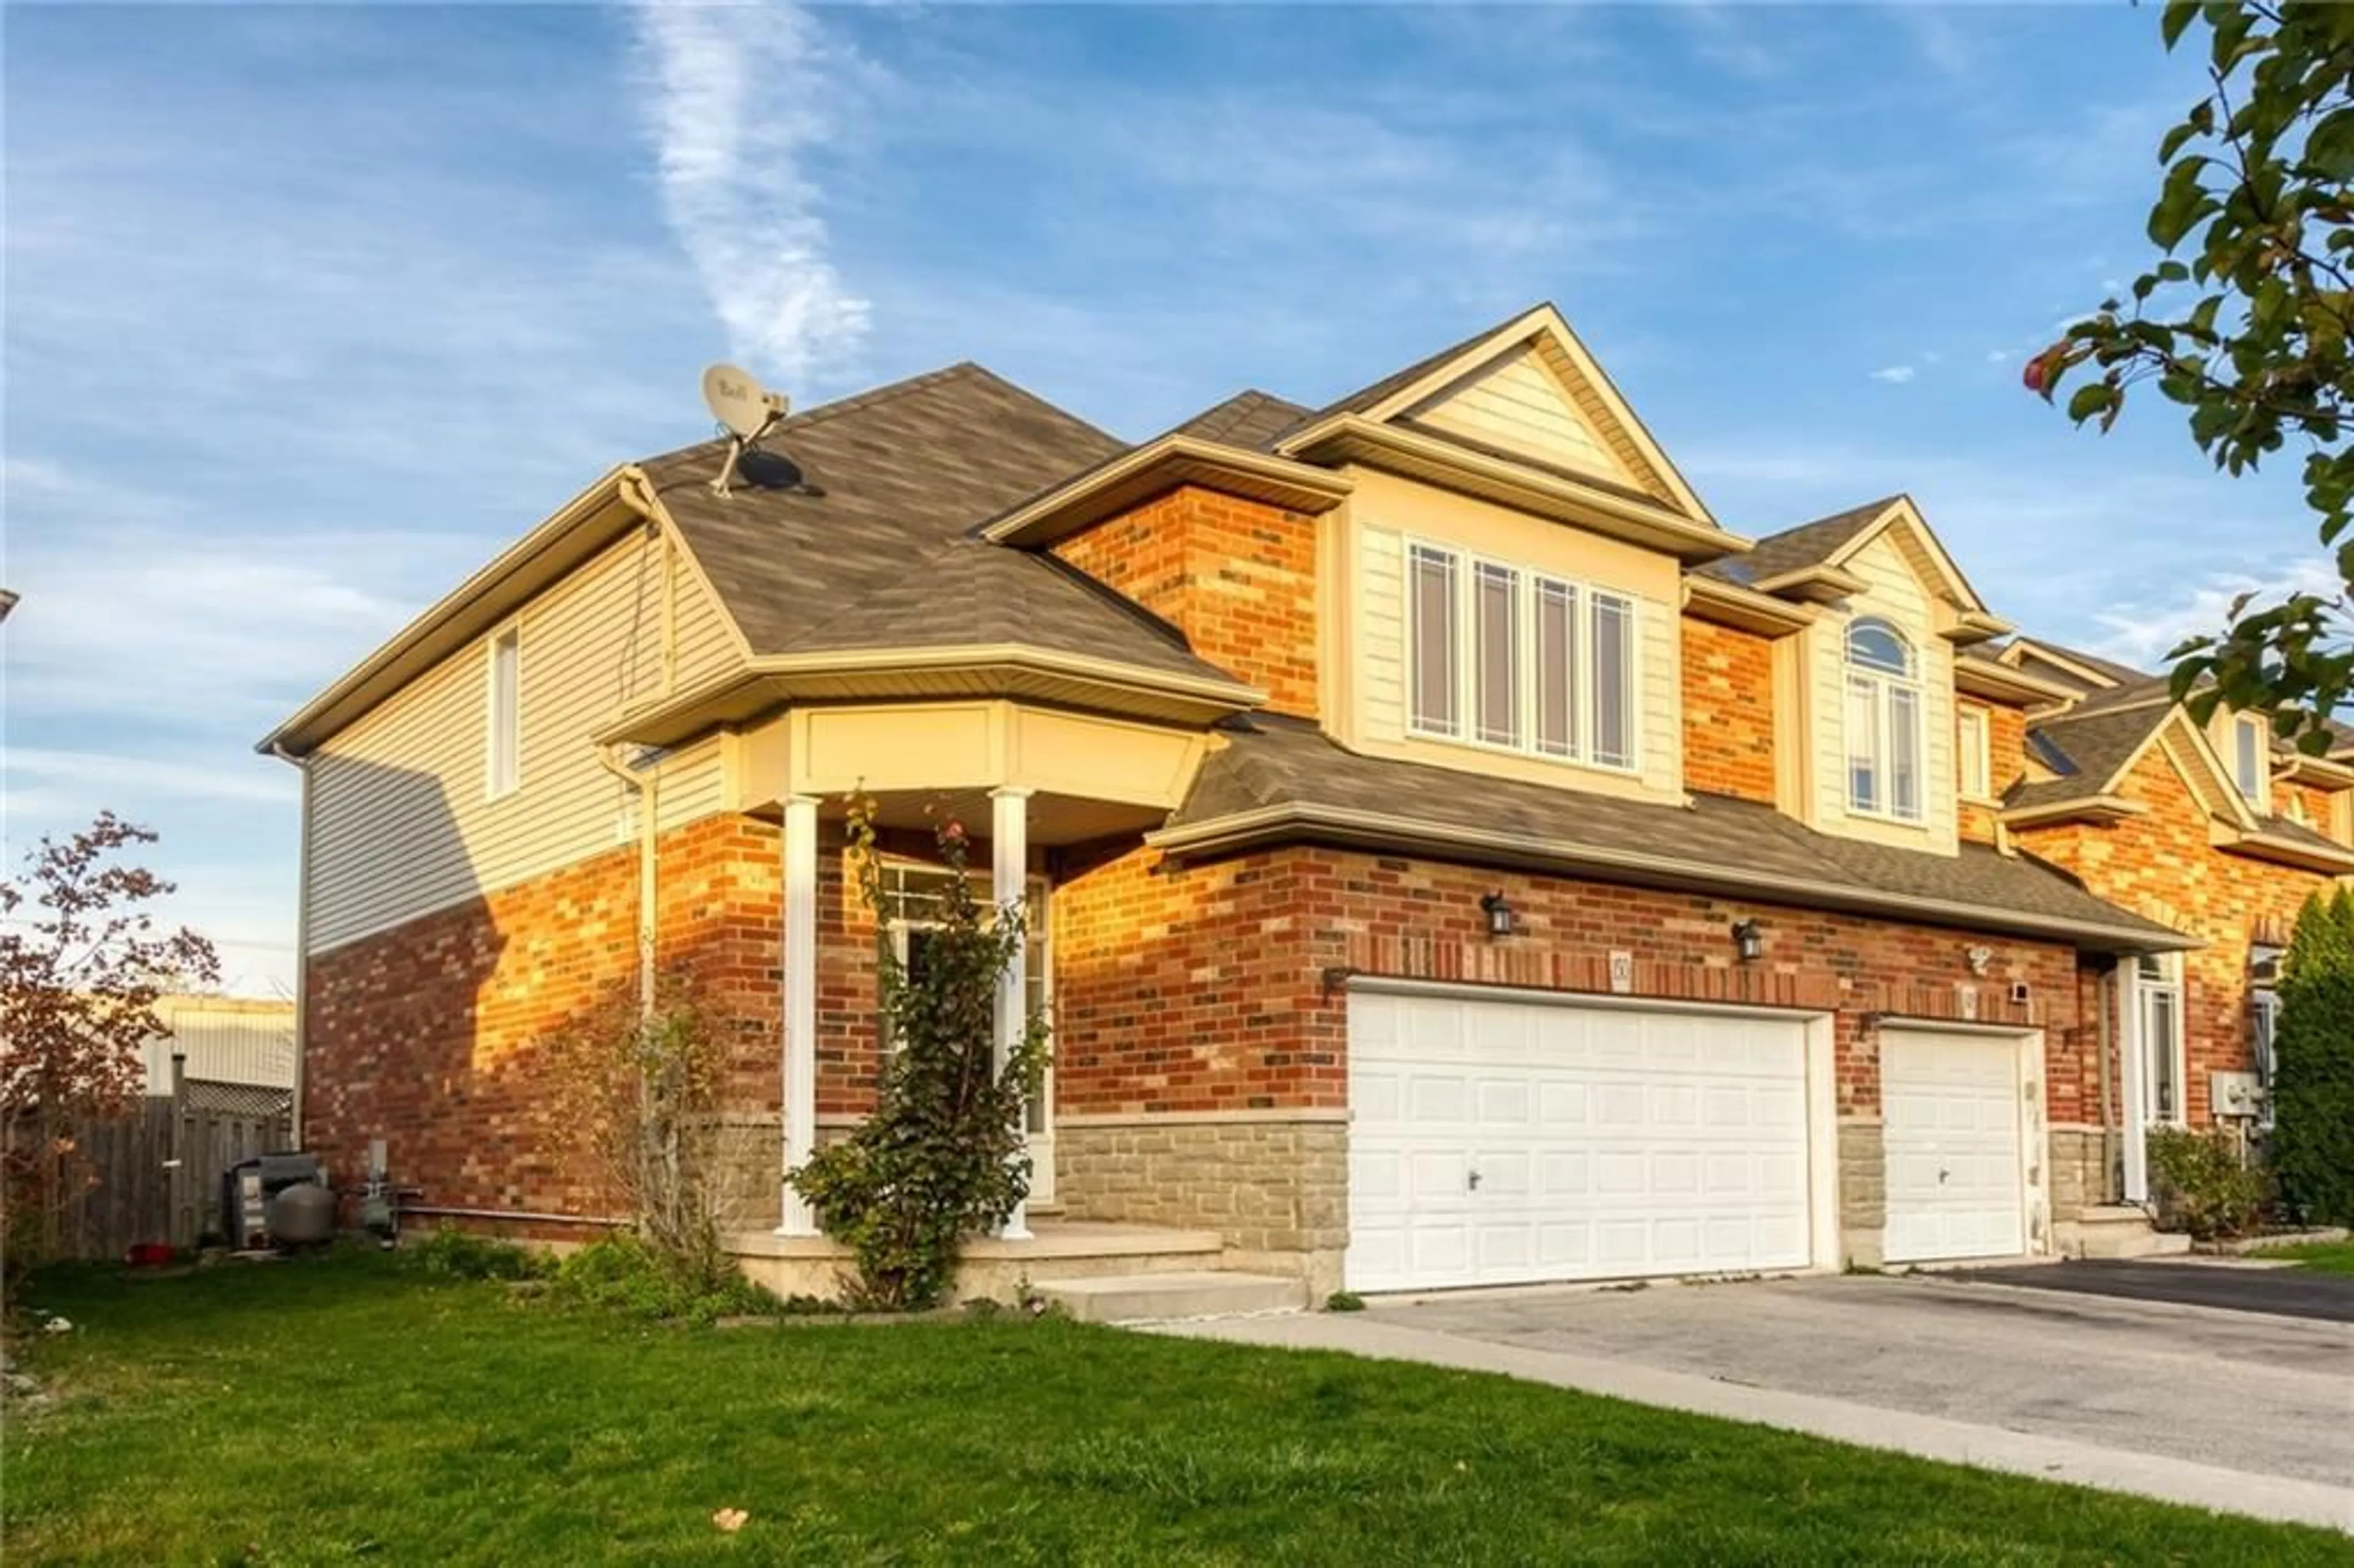 Home with brick exterior material for 150 BENZIGER Lane, Stoney Creek Ontario L8E 6G6